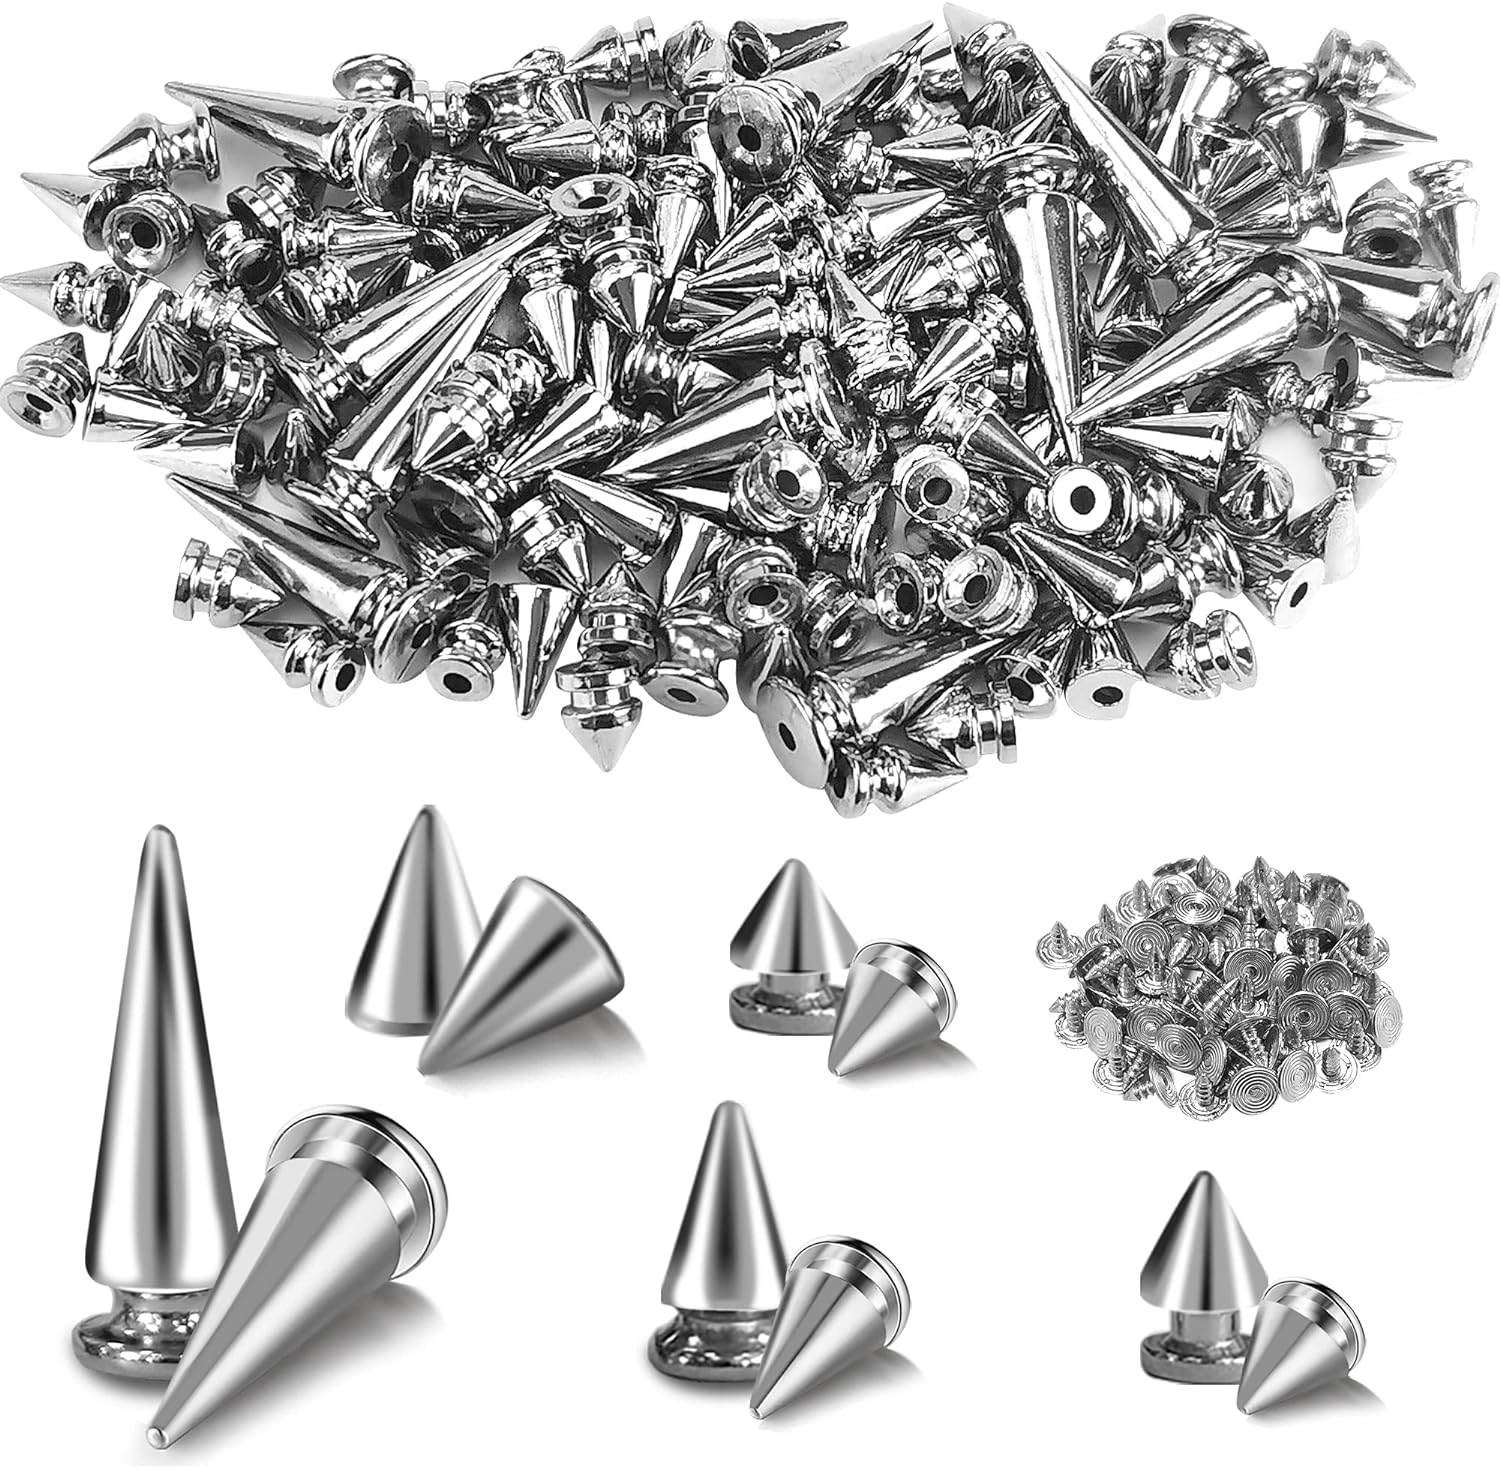  Bastex 205pcs Studs and Spikes. Metal Spikes and Punk